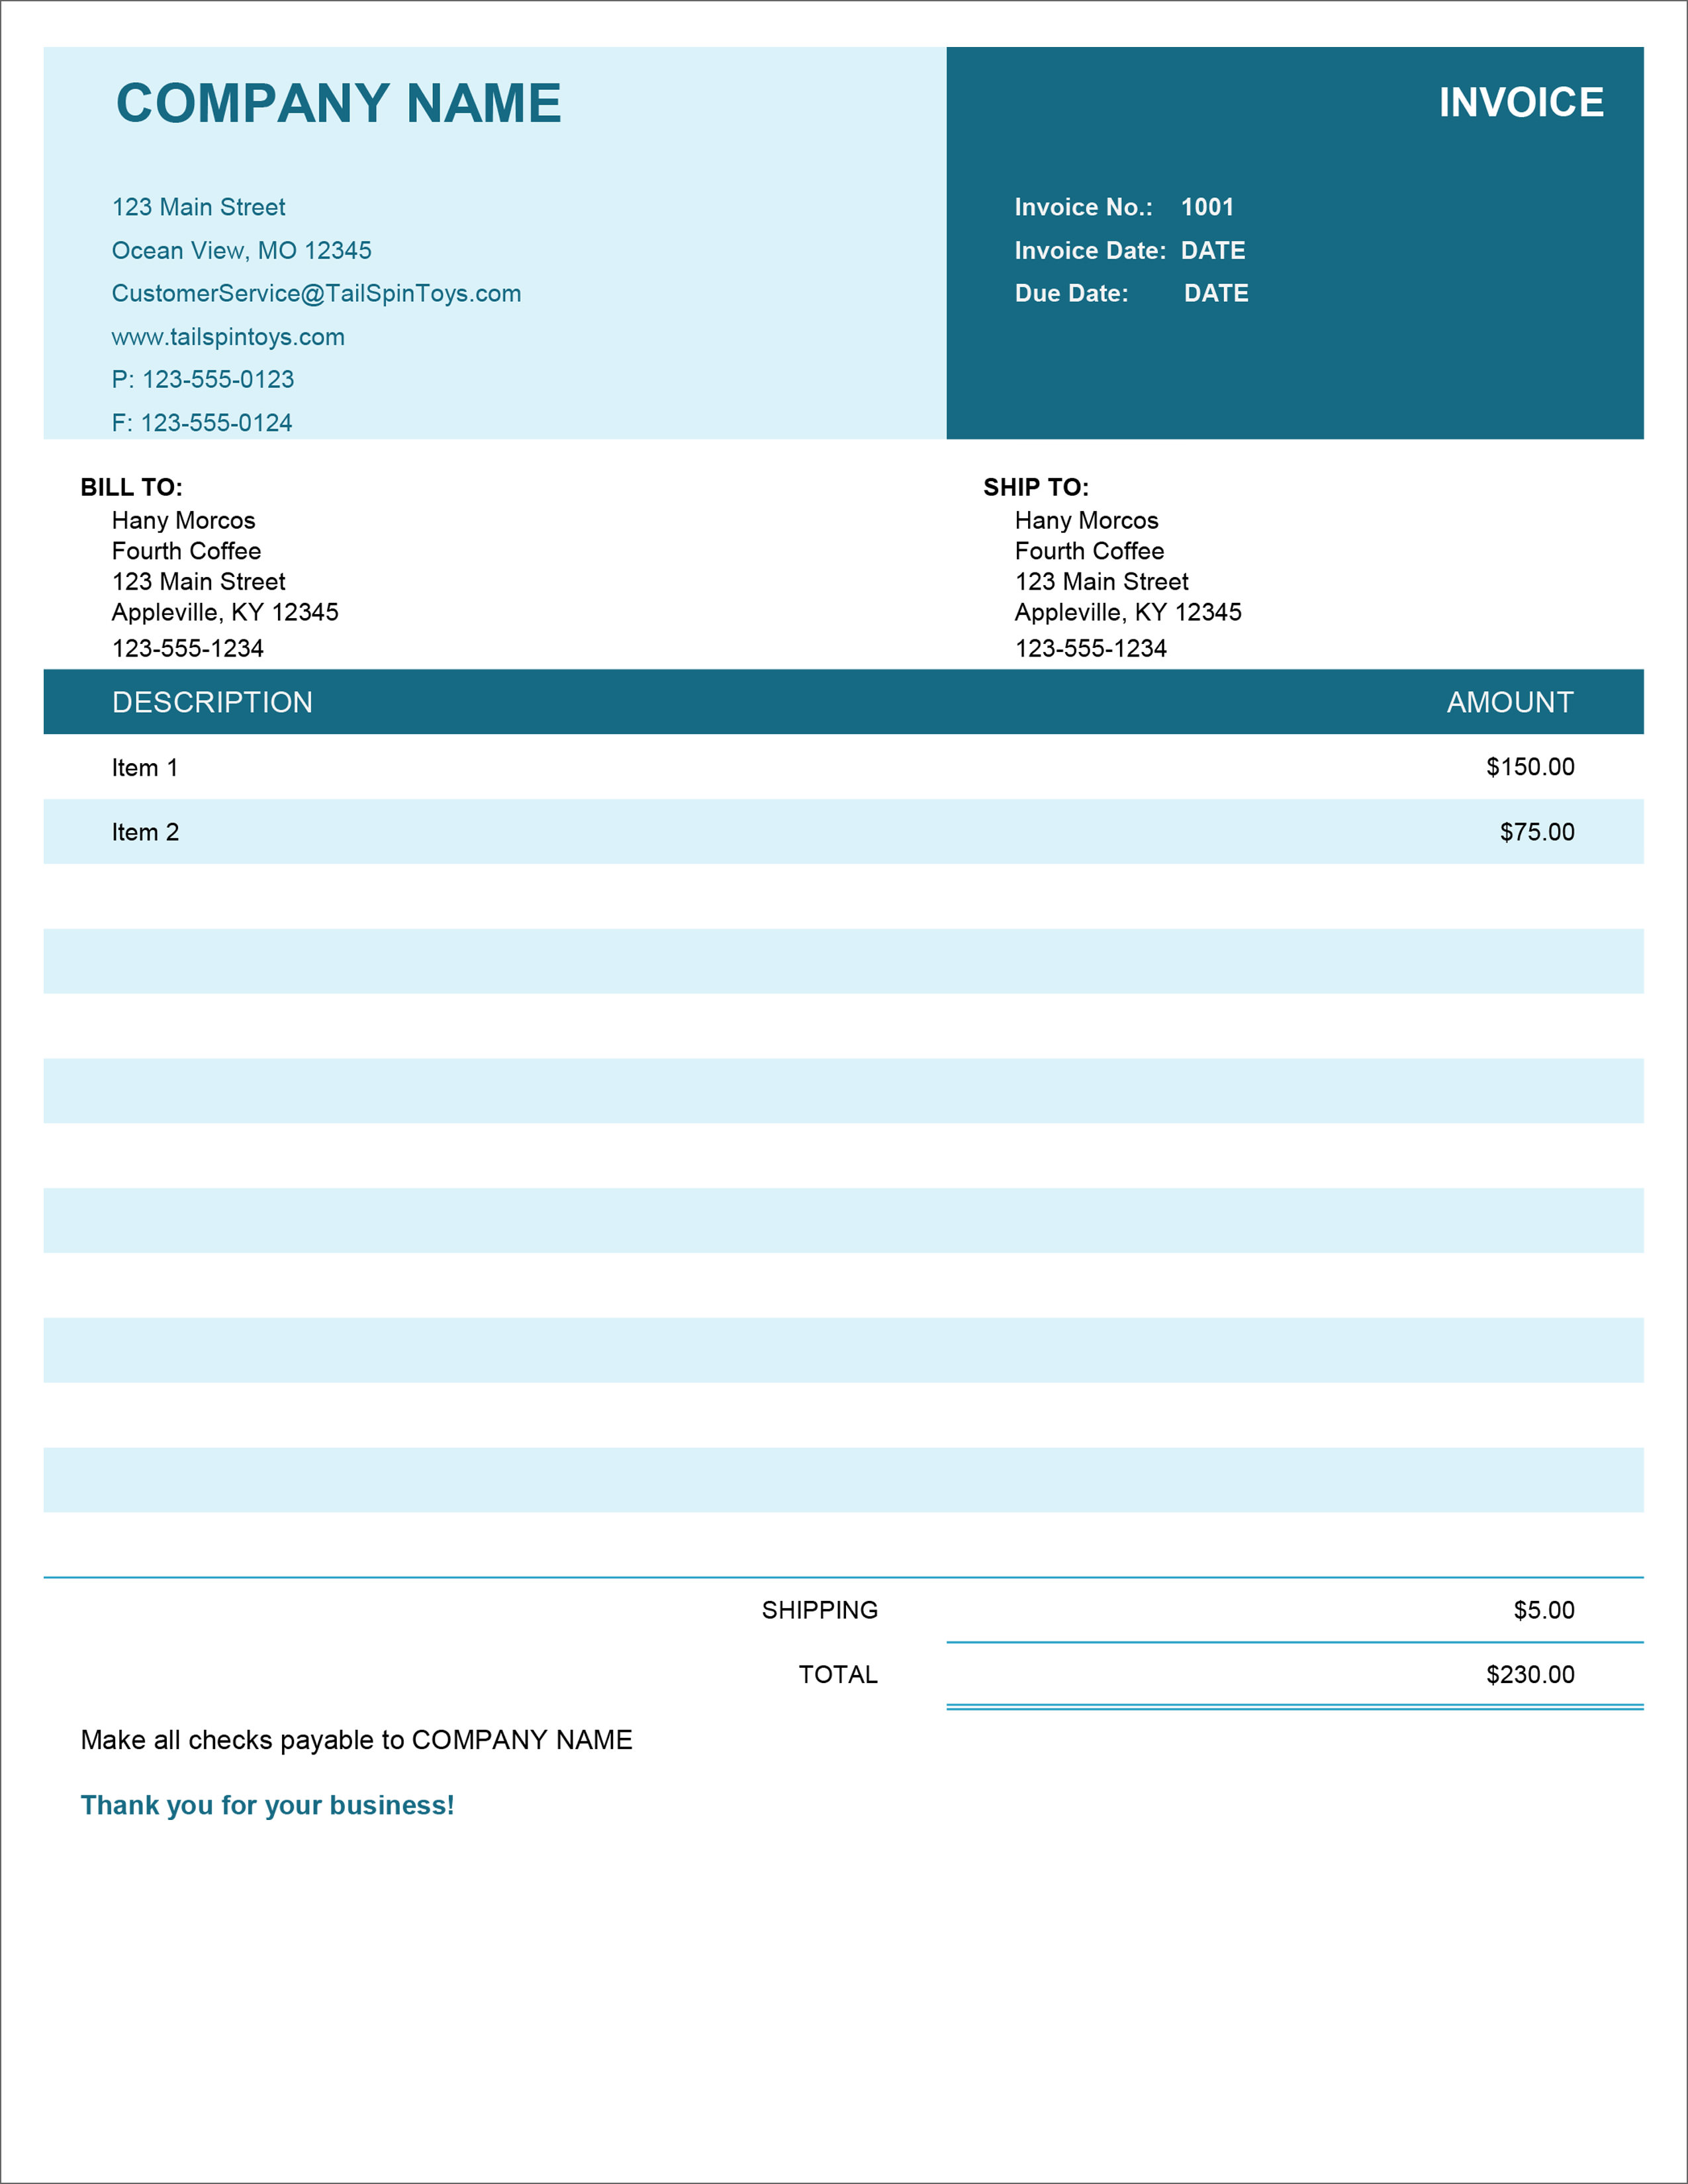 Billing Invoice Template Excel HQ Template Documents